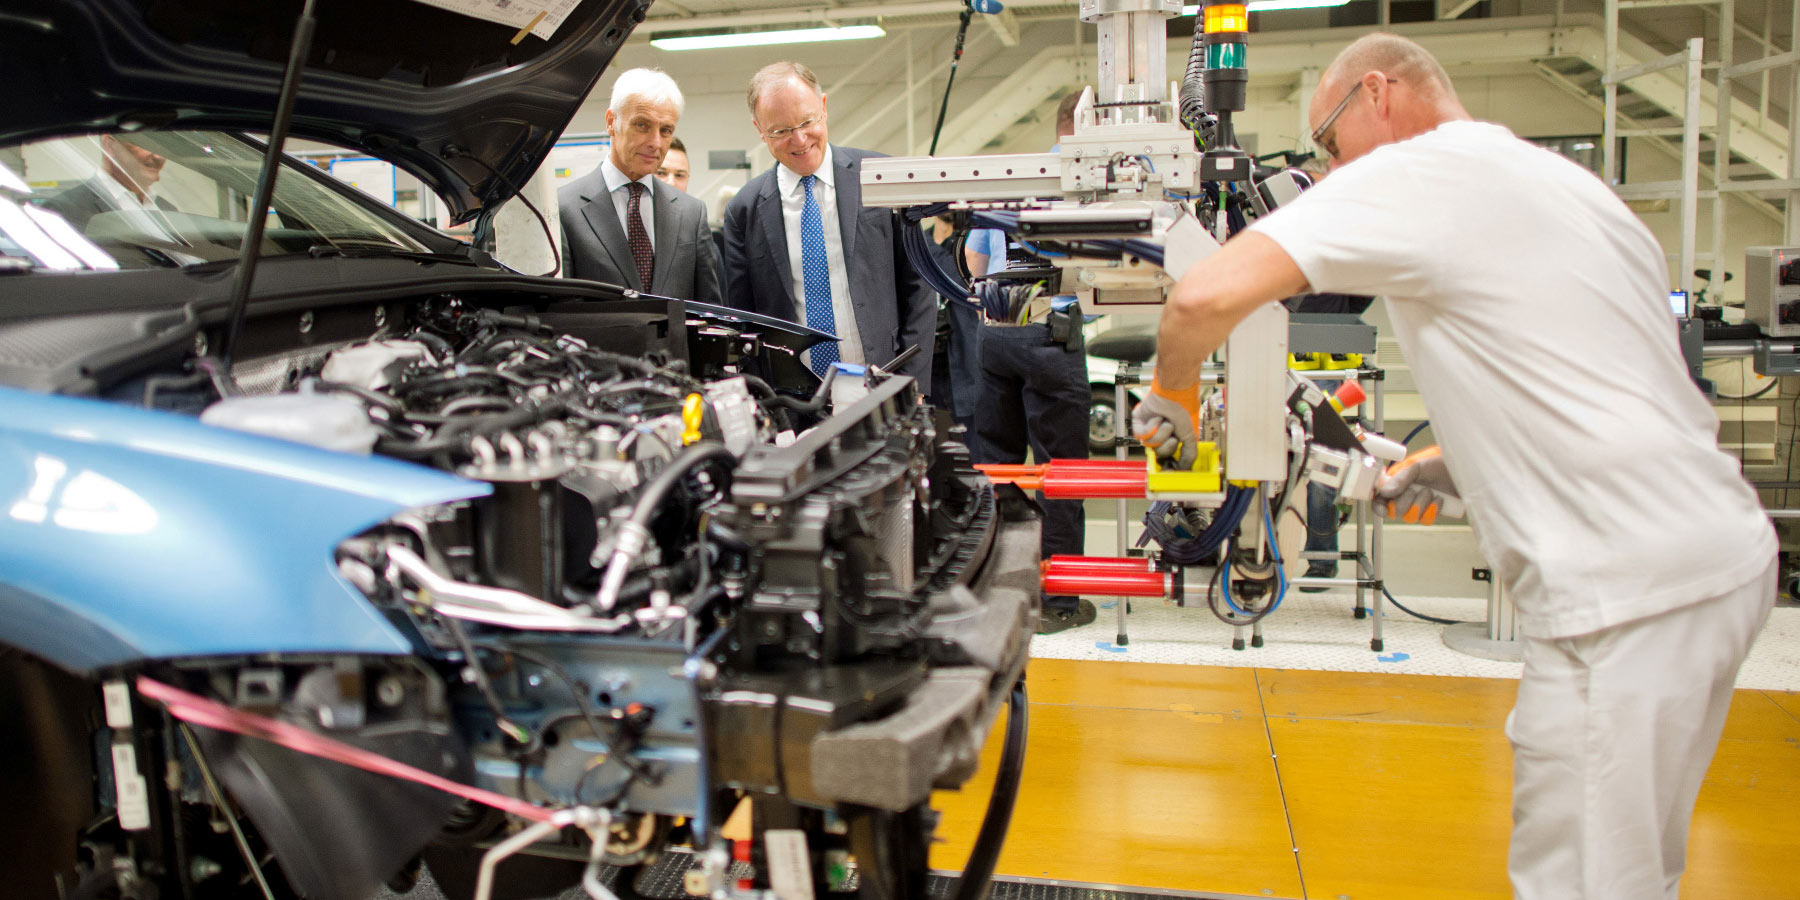 Former VW CEO Matthias Müller (left) and Stephan Weil, premier of Lower Saxony, tour a VW factory in 2017